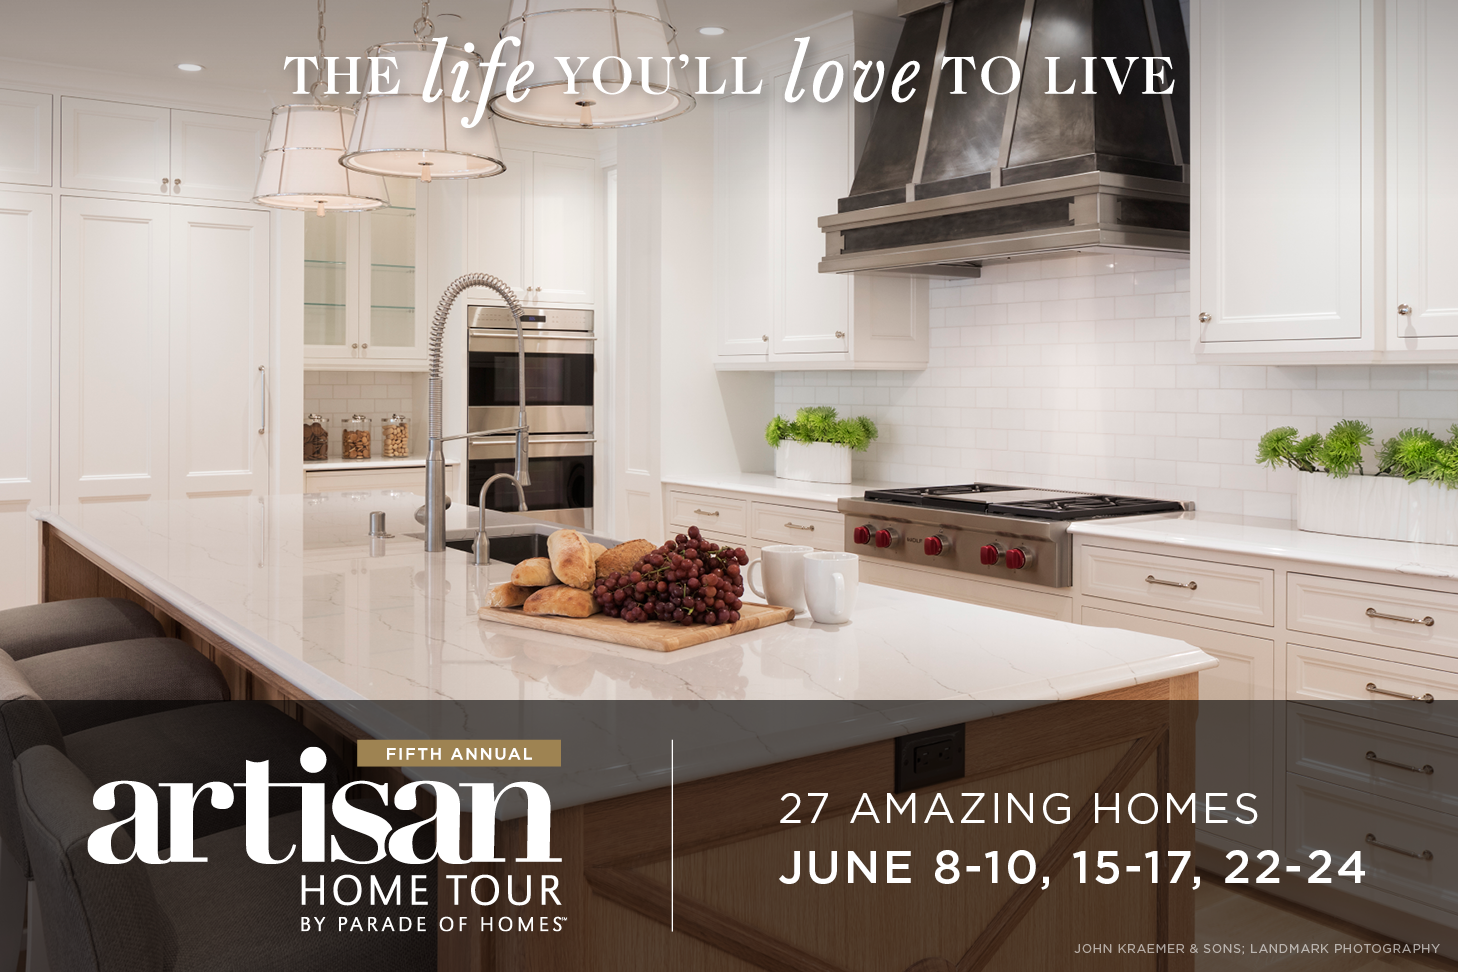 Image for Facts About the 2018 Artisan Home Tour by Parade of Homes